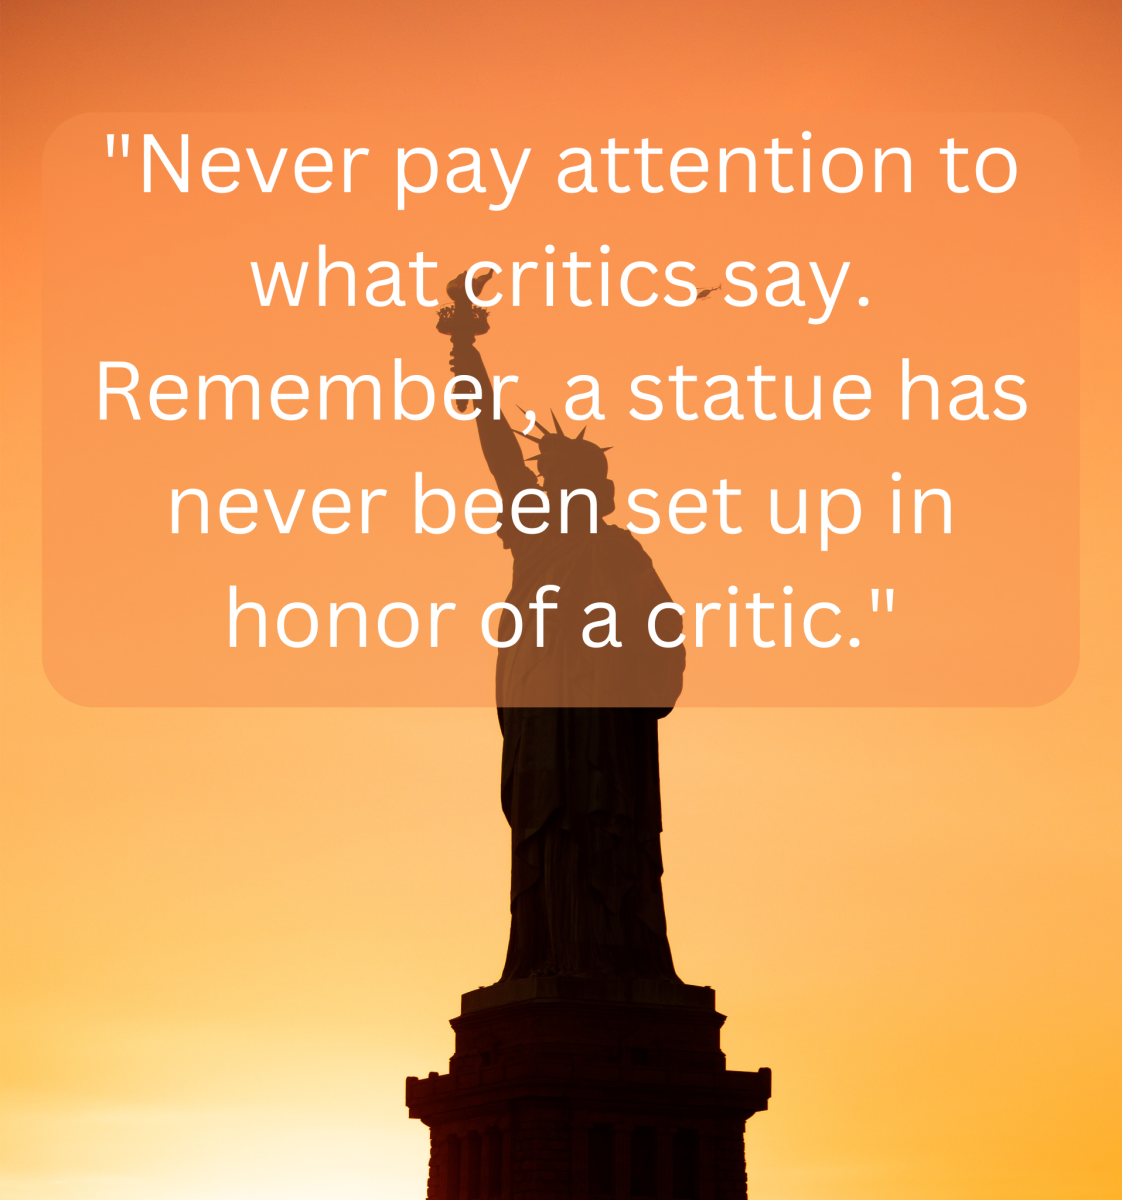 "Never pay attention to what critics say. Remember, a statue has never been set up in honor of a critic." - Jean Sibelius